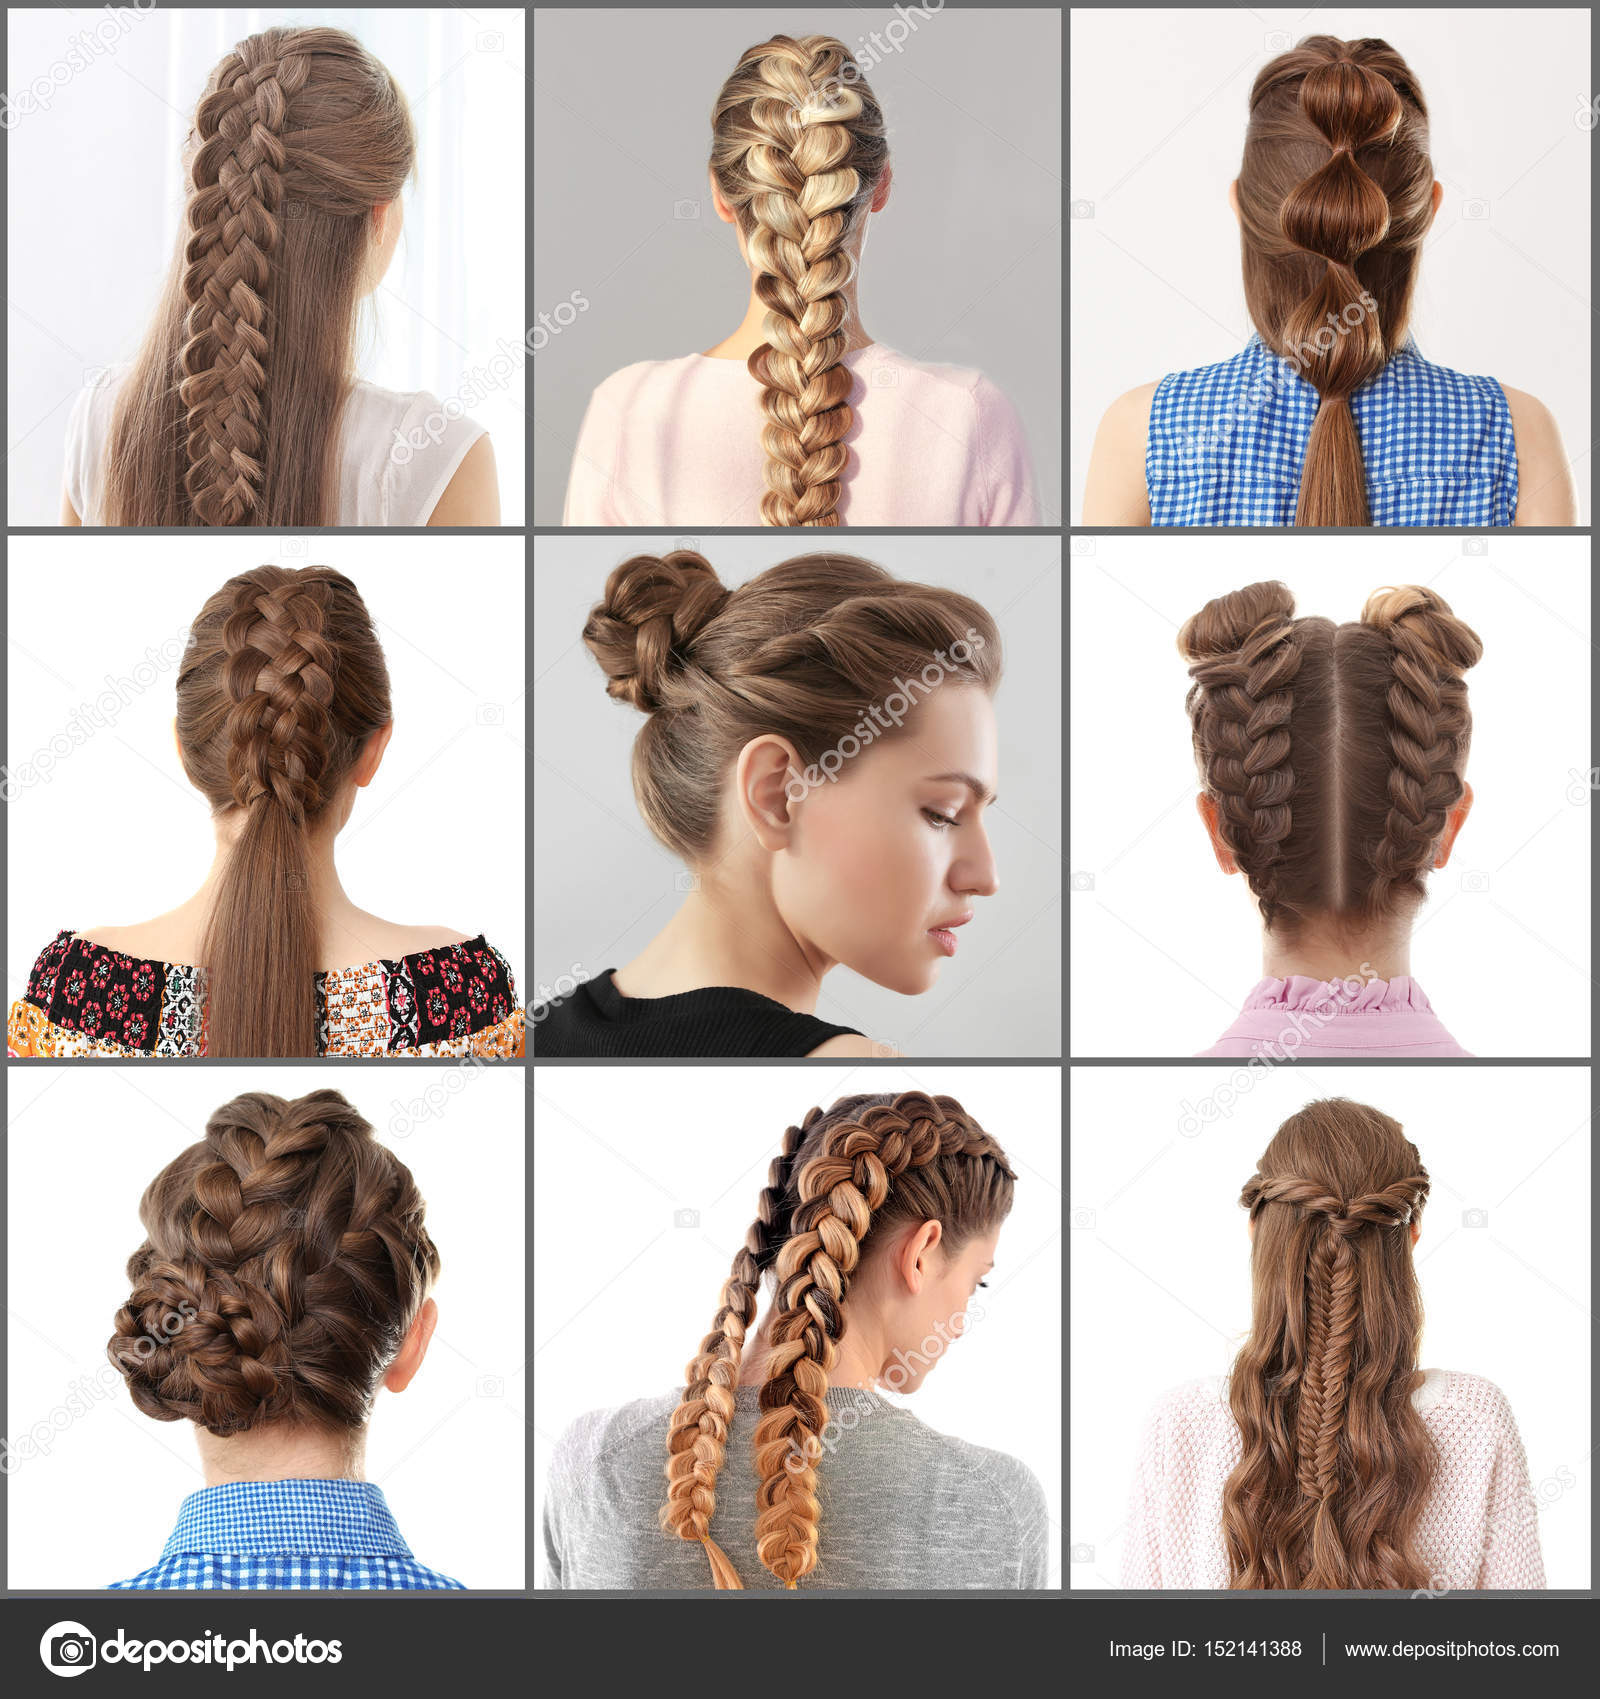 34 Different Types of Hairstyles for Women  TopOfStyle Blog